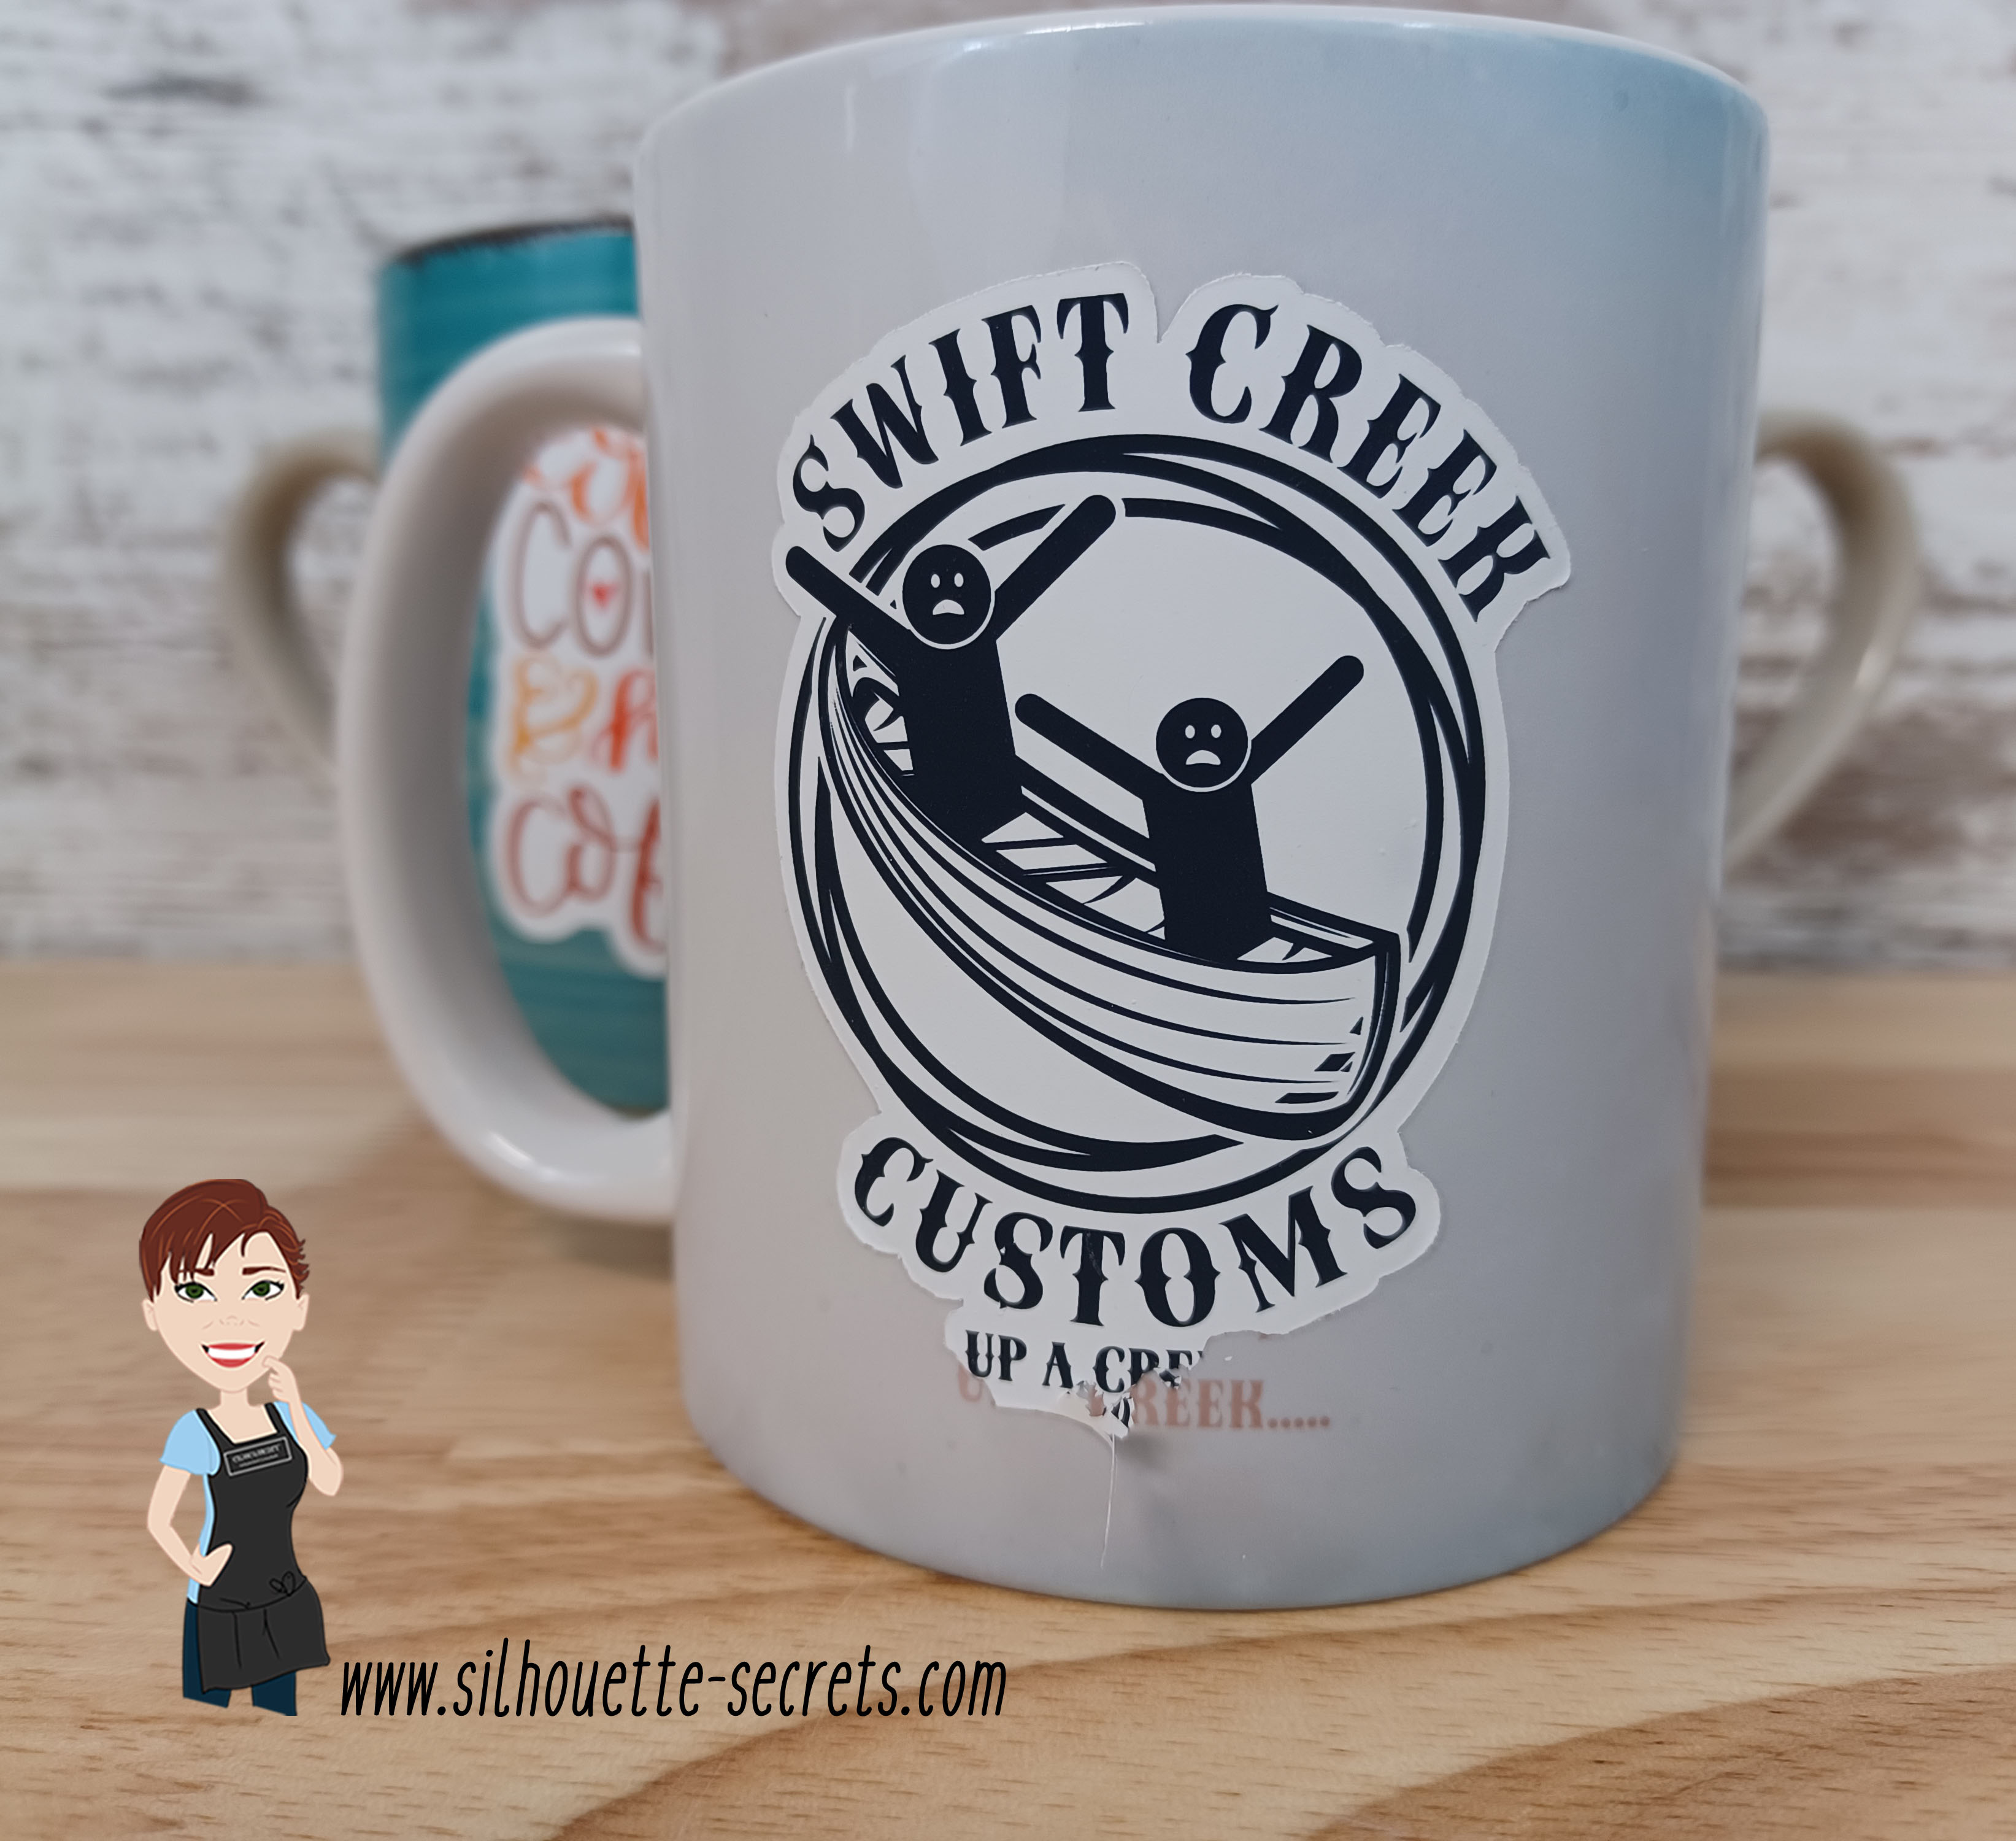 Cutting Issues & Troubleshooting – Silhouette Secrets+ by Swift Creek  Customs